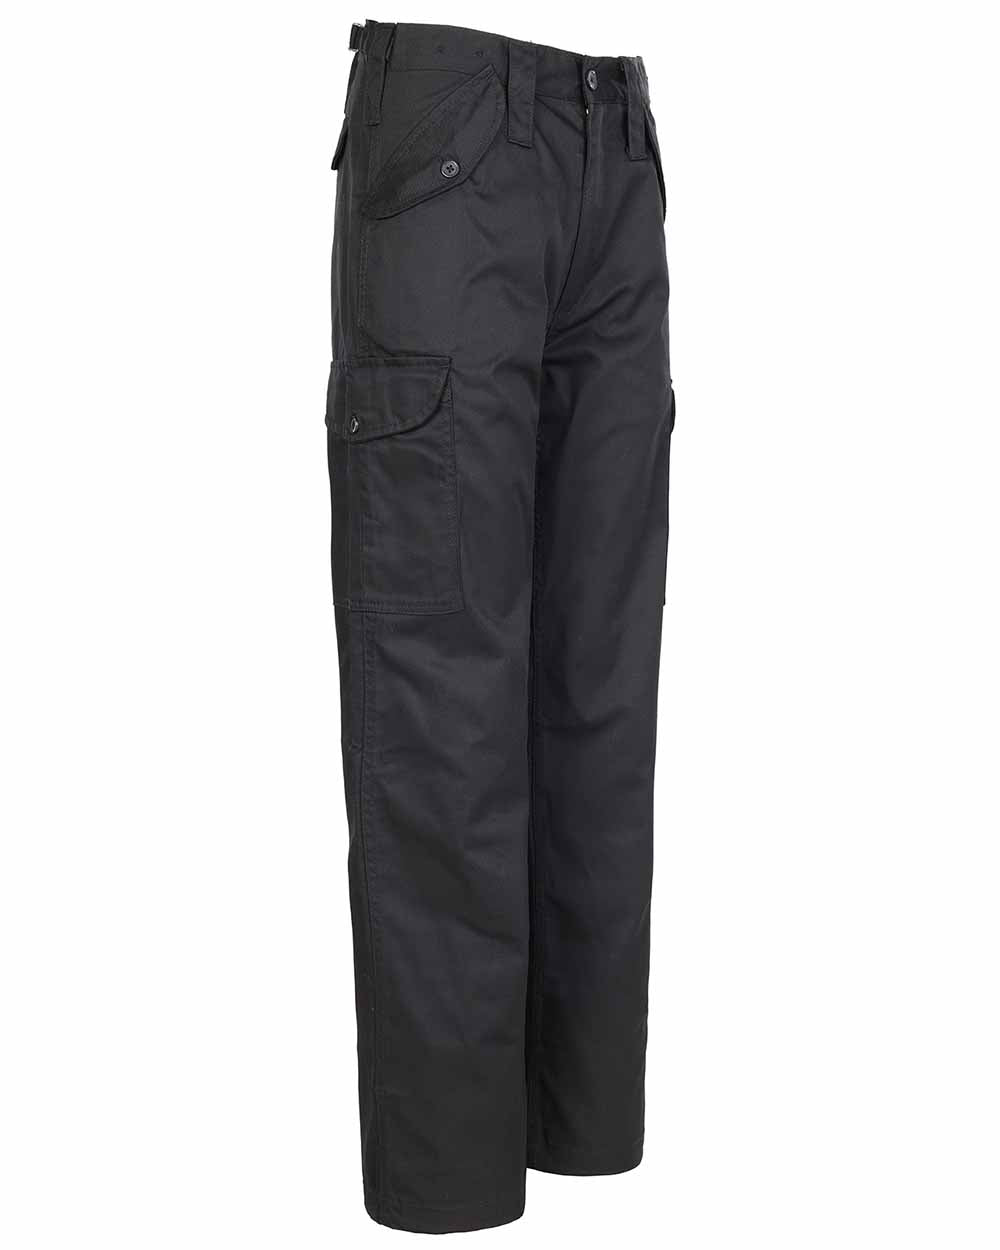 Fort Combat Trousers in Black 